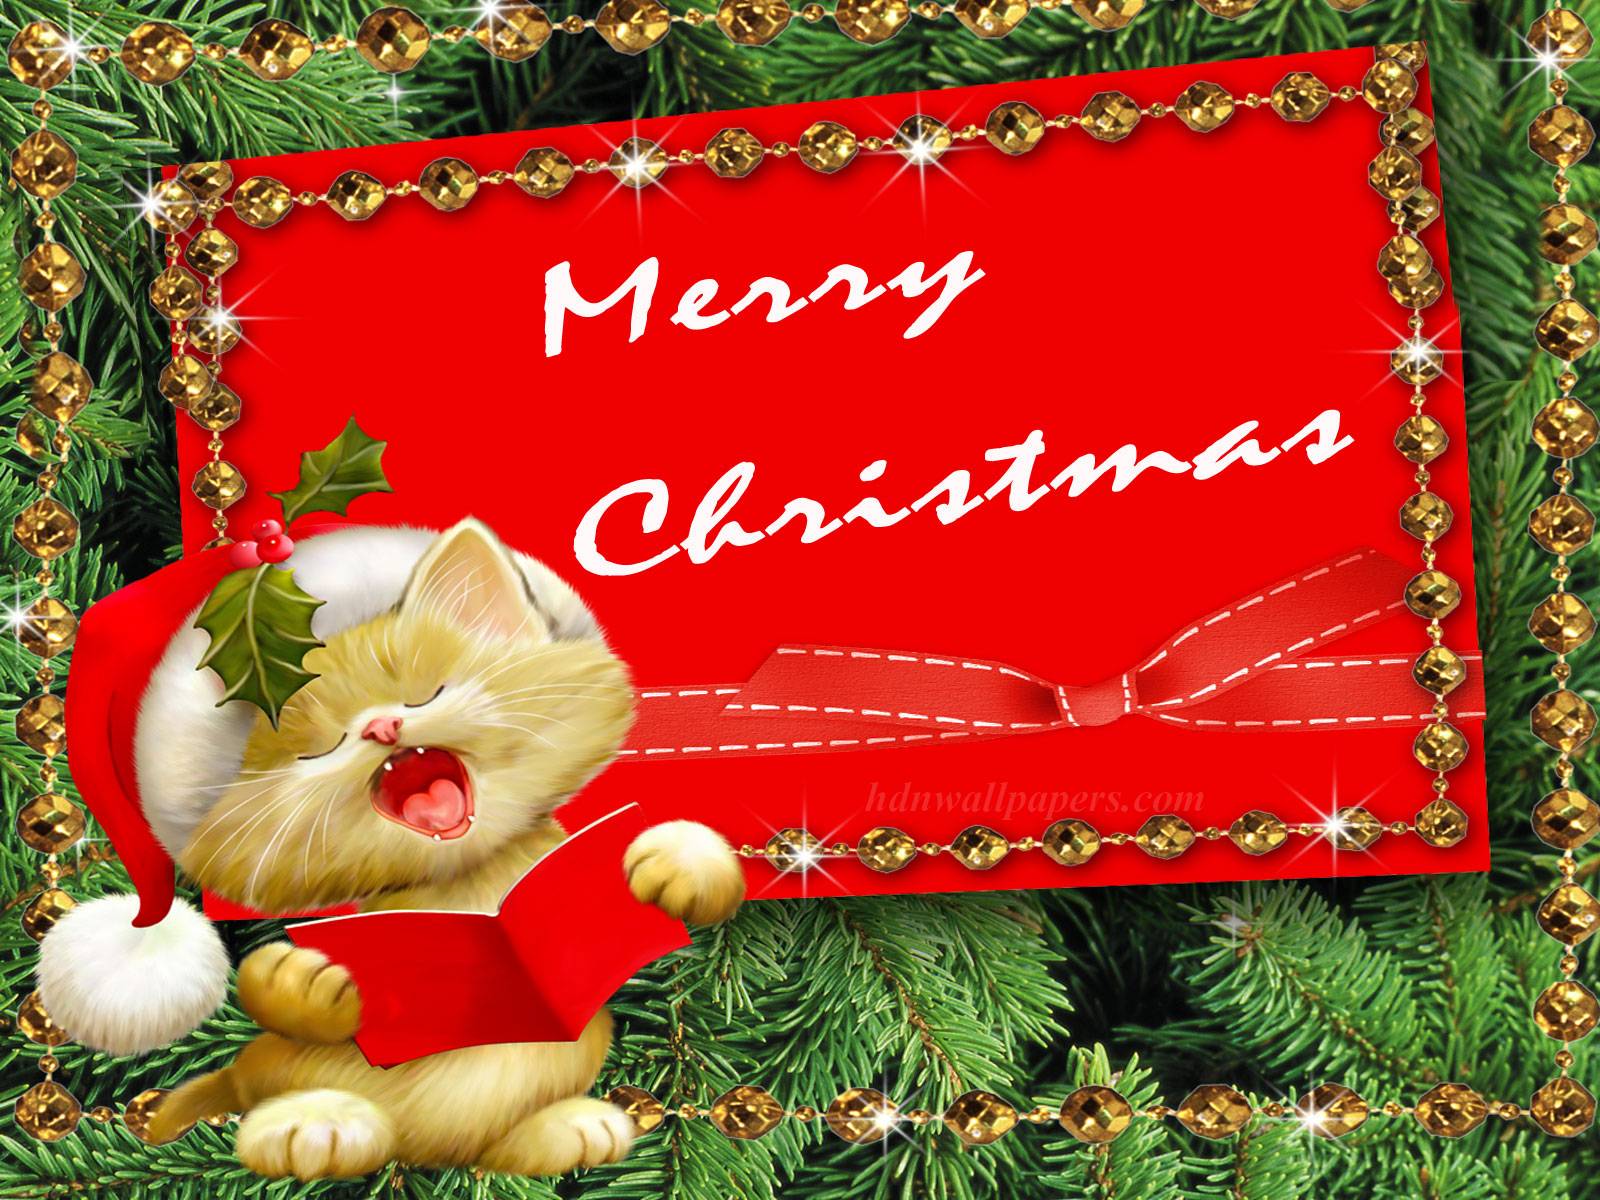 Merry Christmas Live HD Wallpaper Free Download